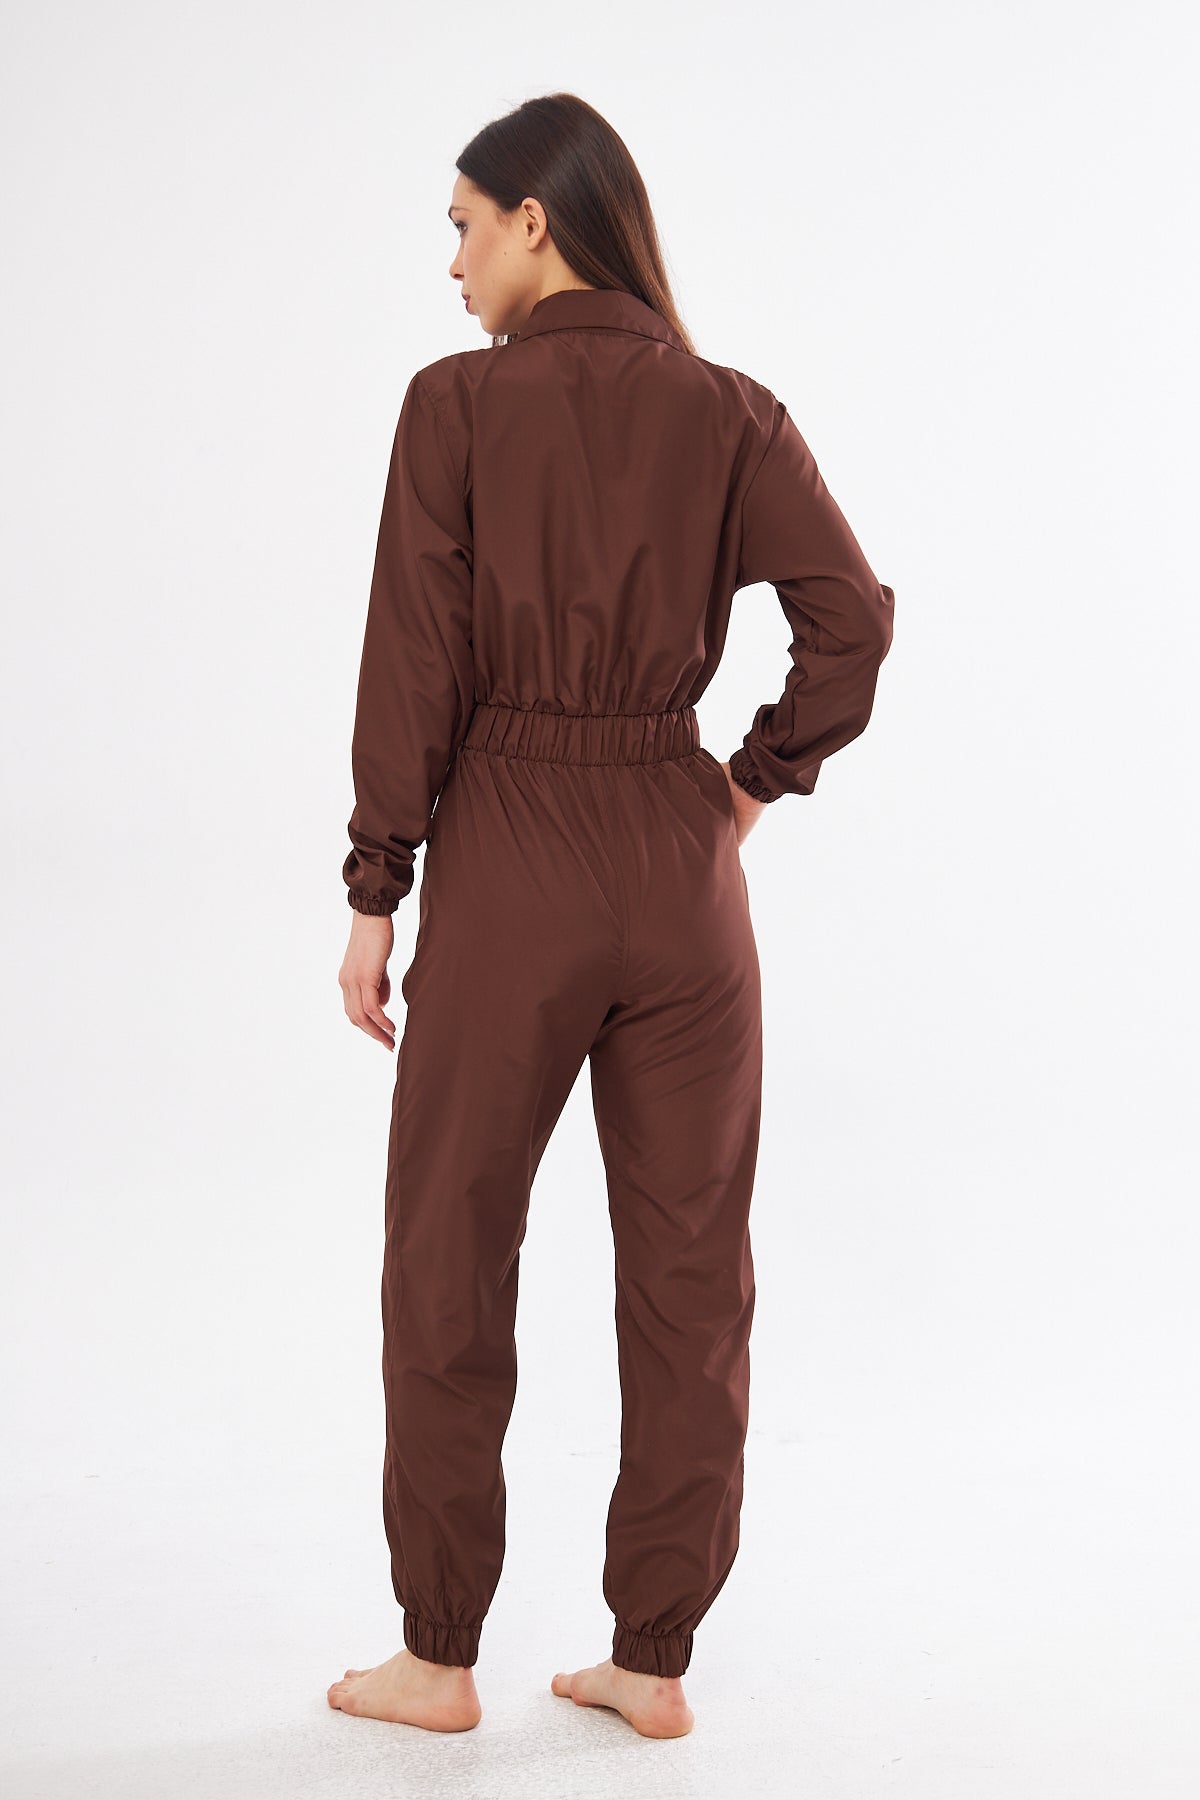 By Suu Sever Brown Jumpsuit Hijab Swimsuit